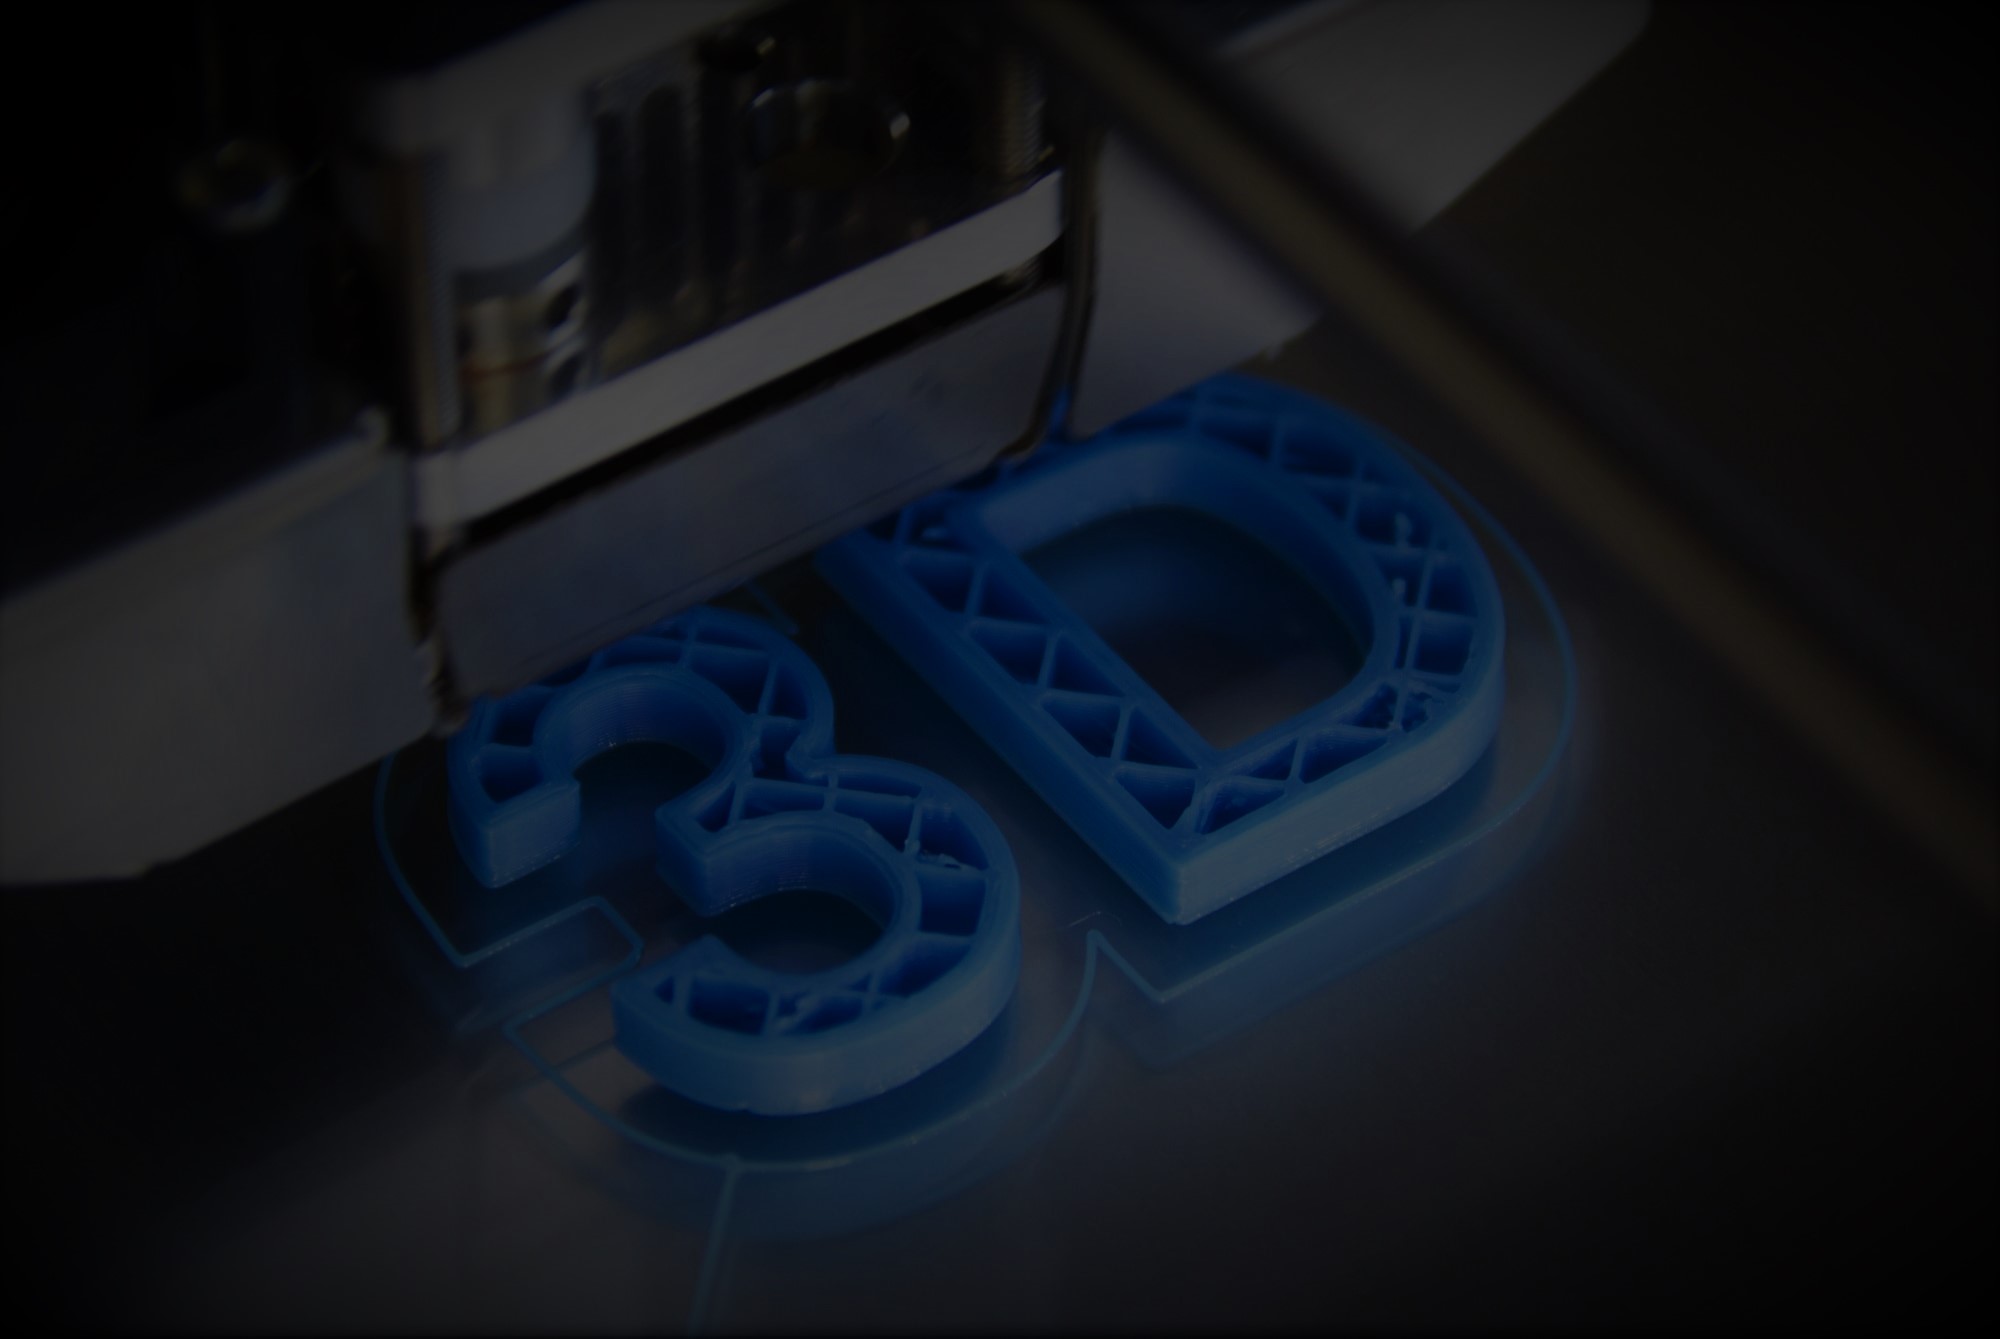 3D-Printing Services